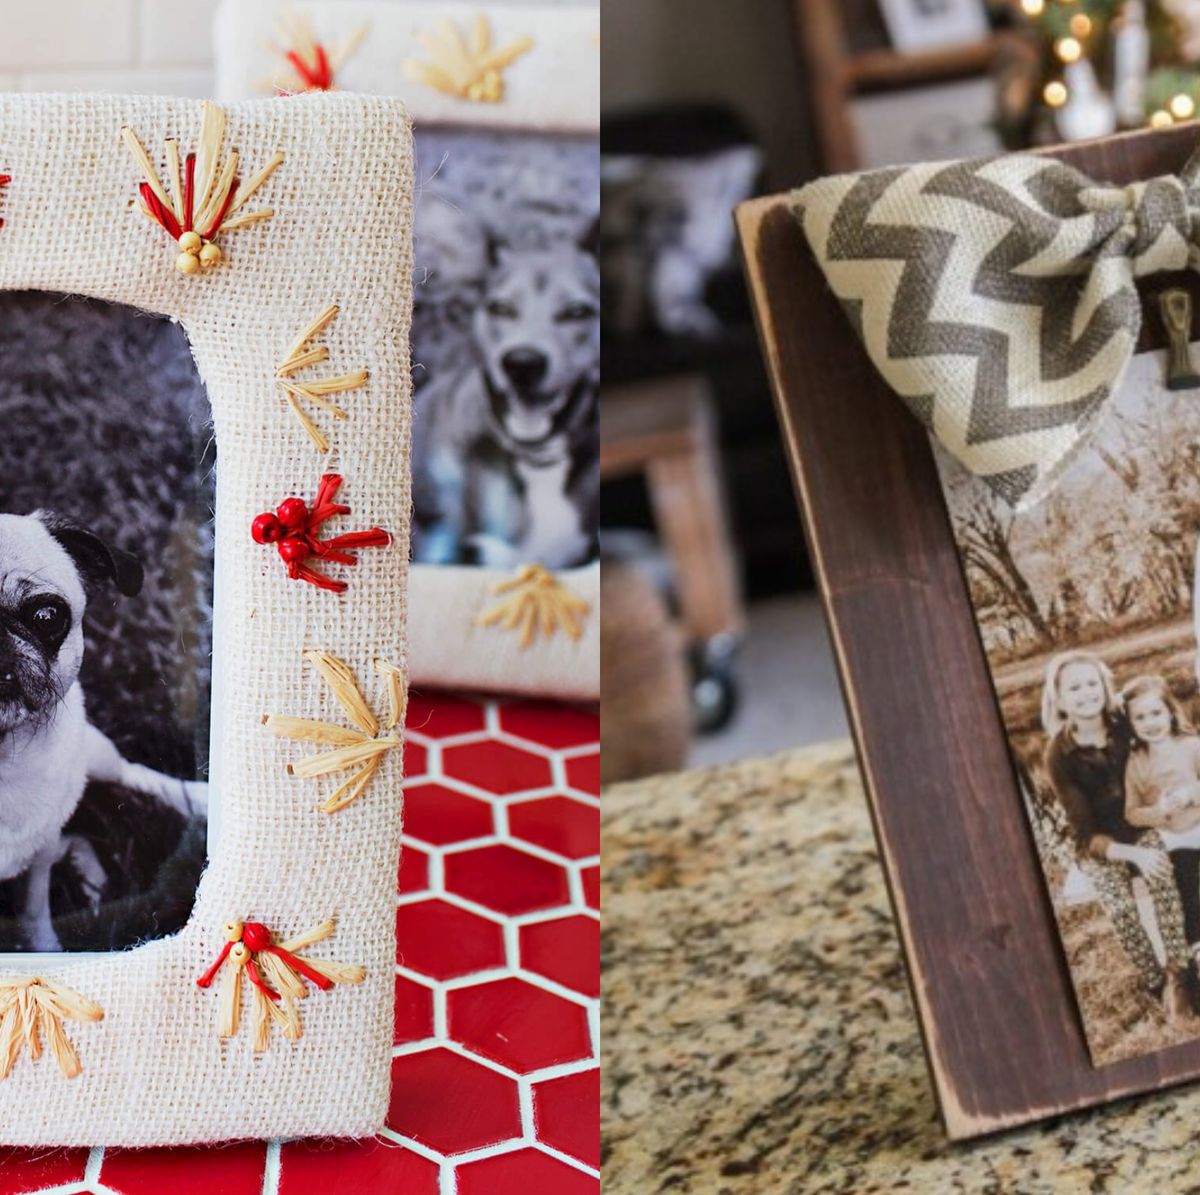 16 DIY Picture Frame Ideas - How to Make a Wooden Picture Frame